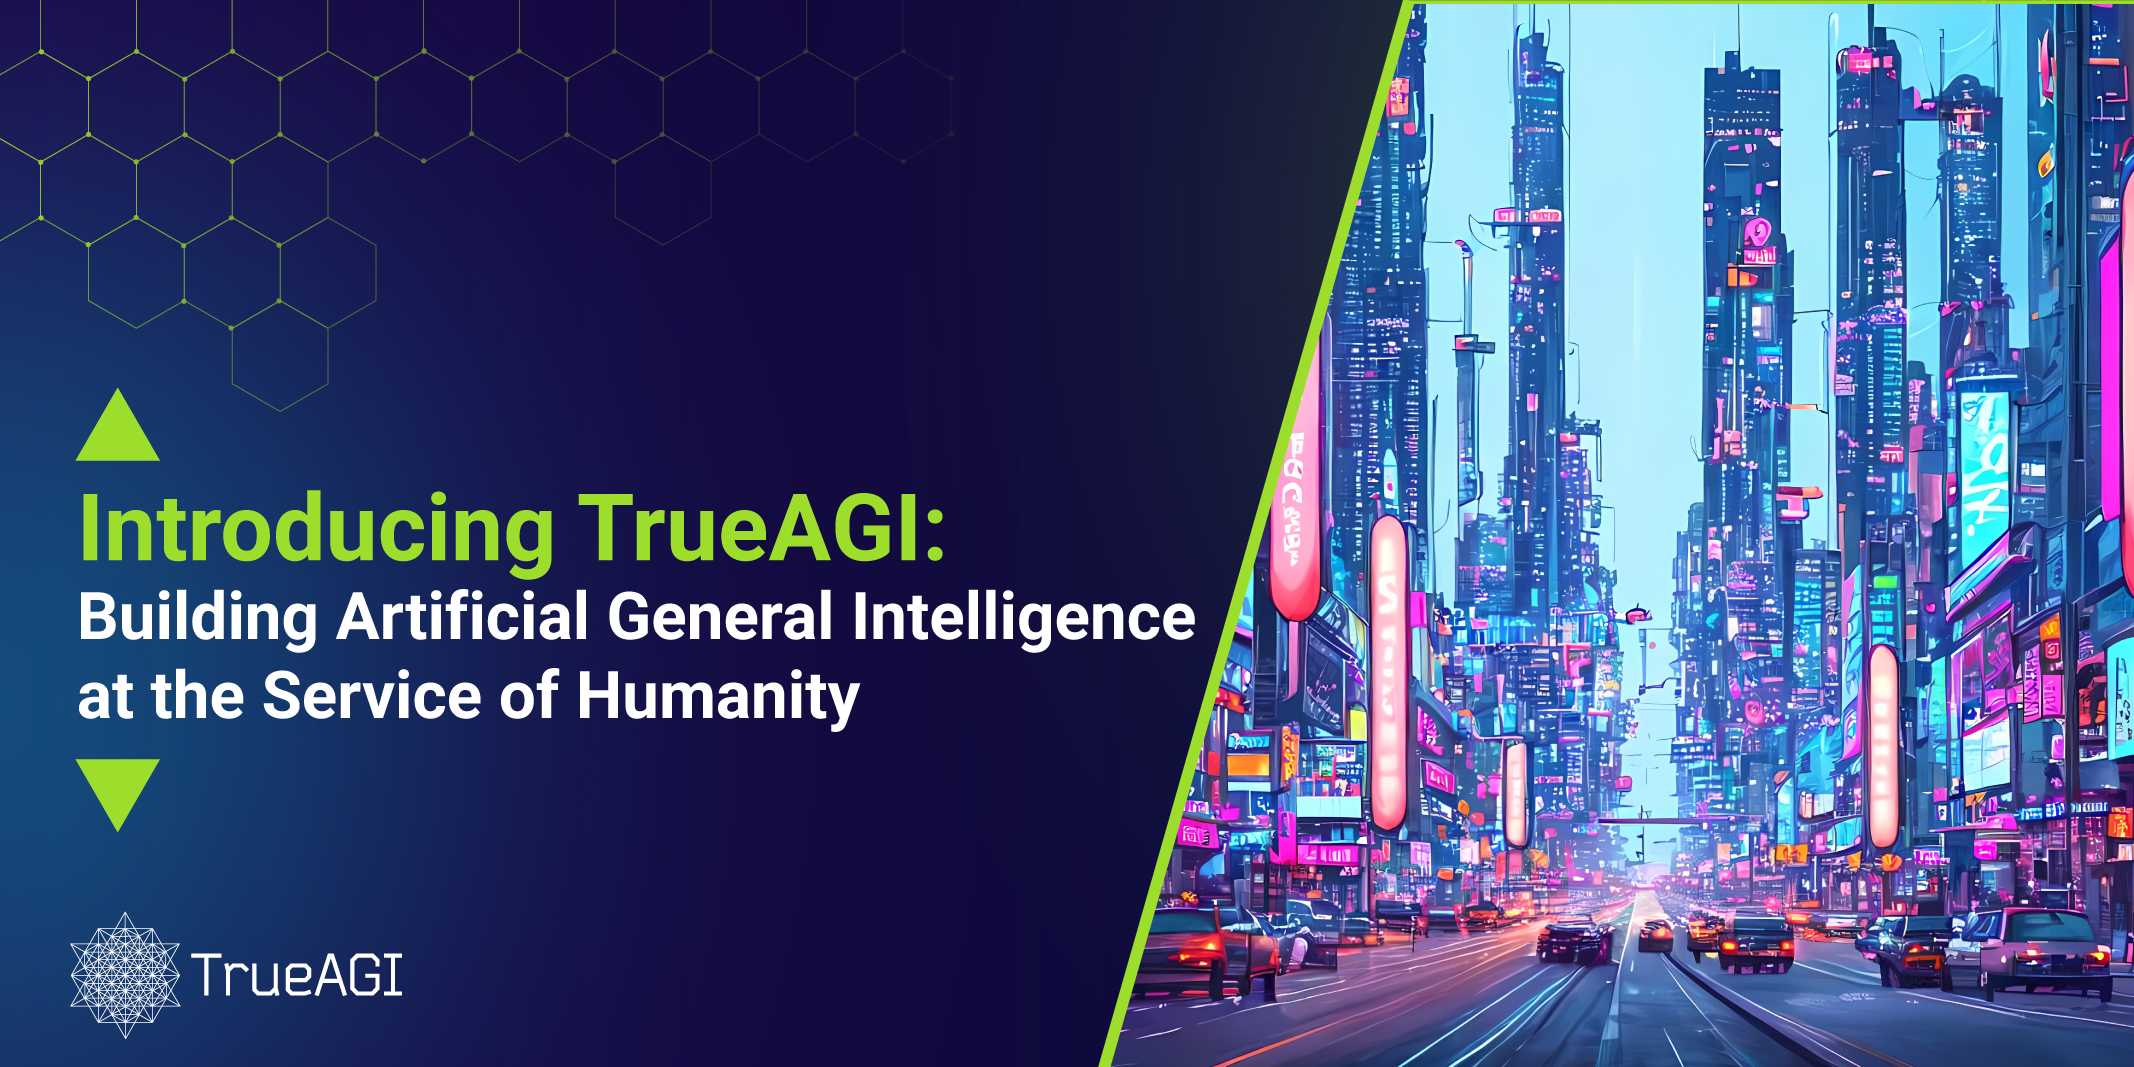 AGI technology will change humanity's way of life for the better.